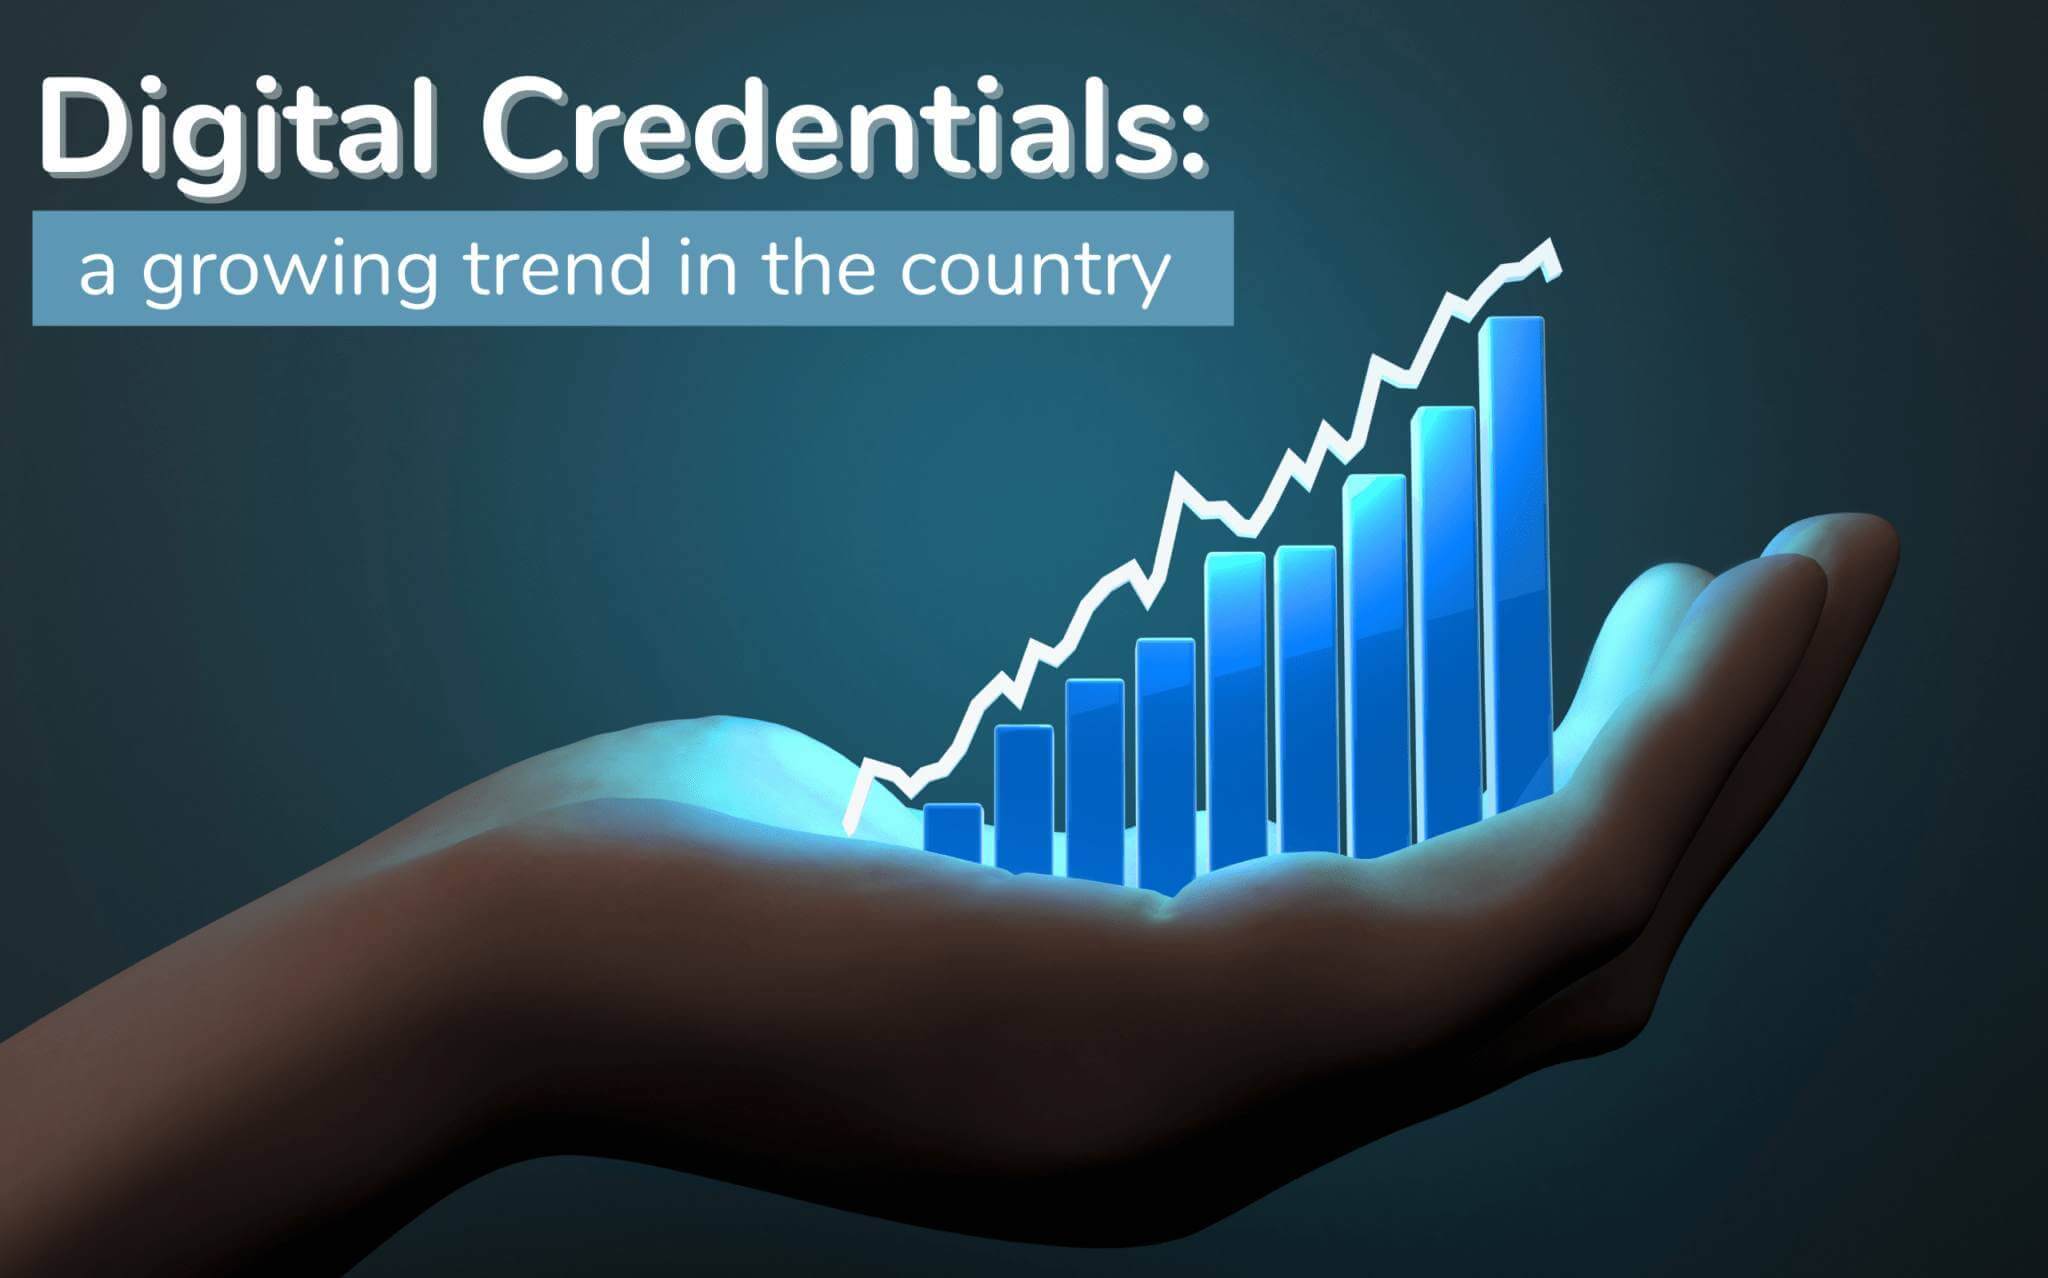 Digital Credentials: a growing trend in country